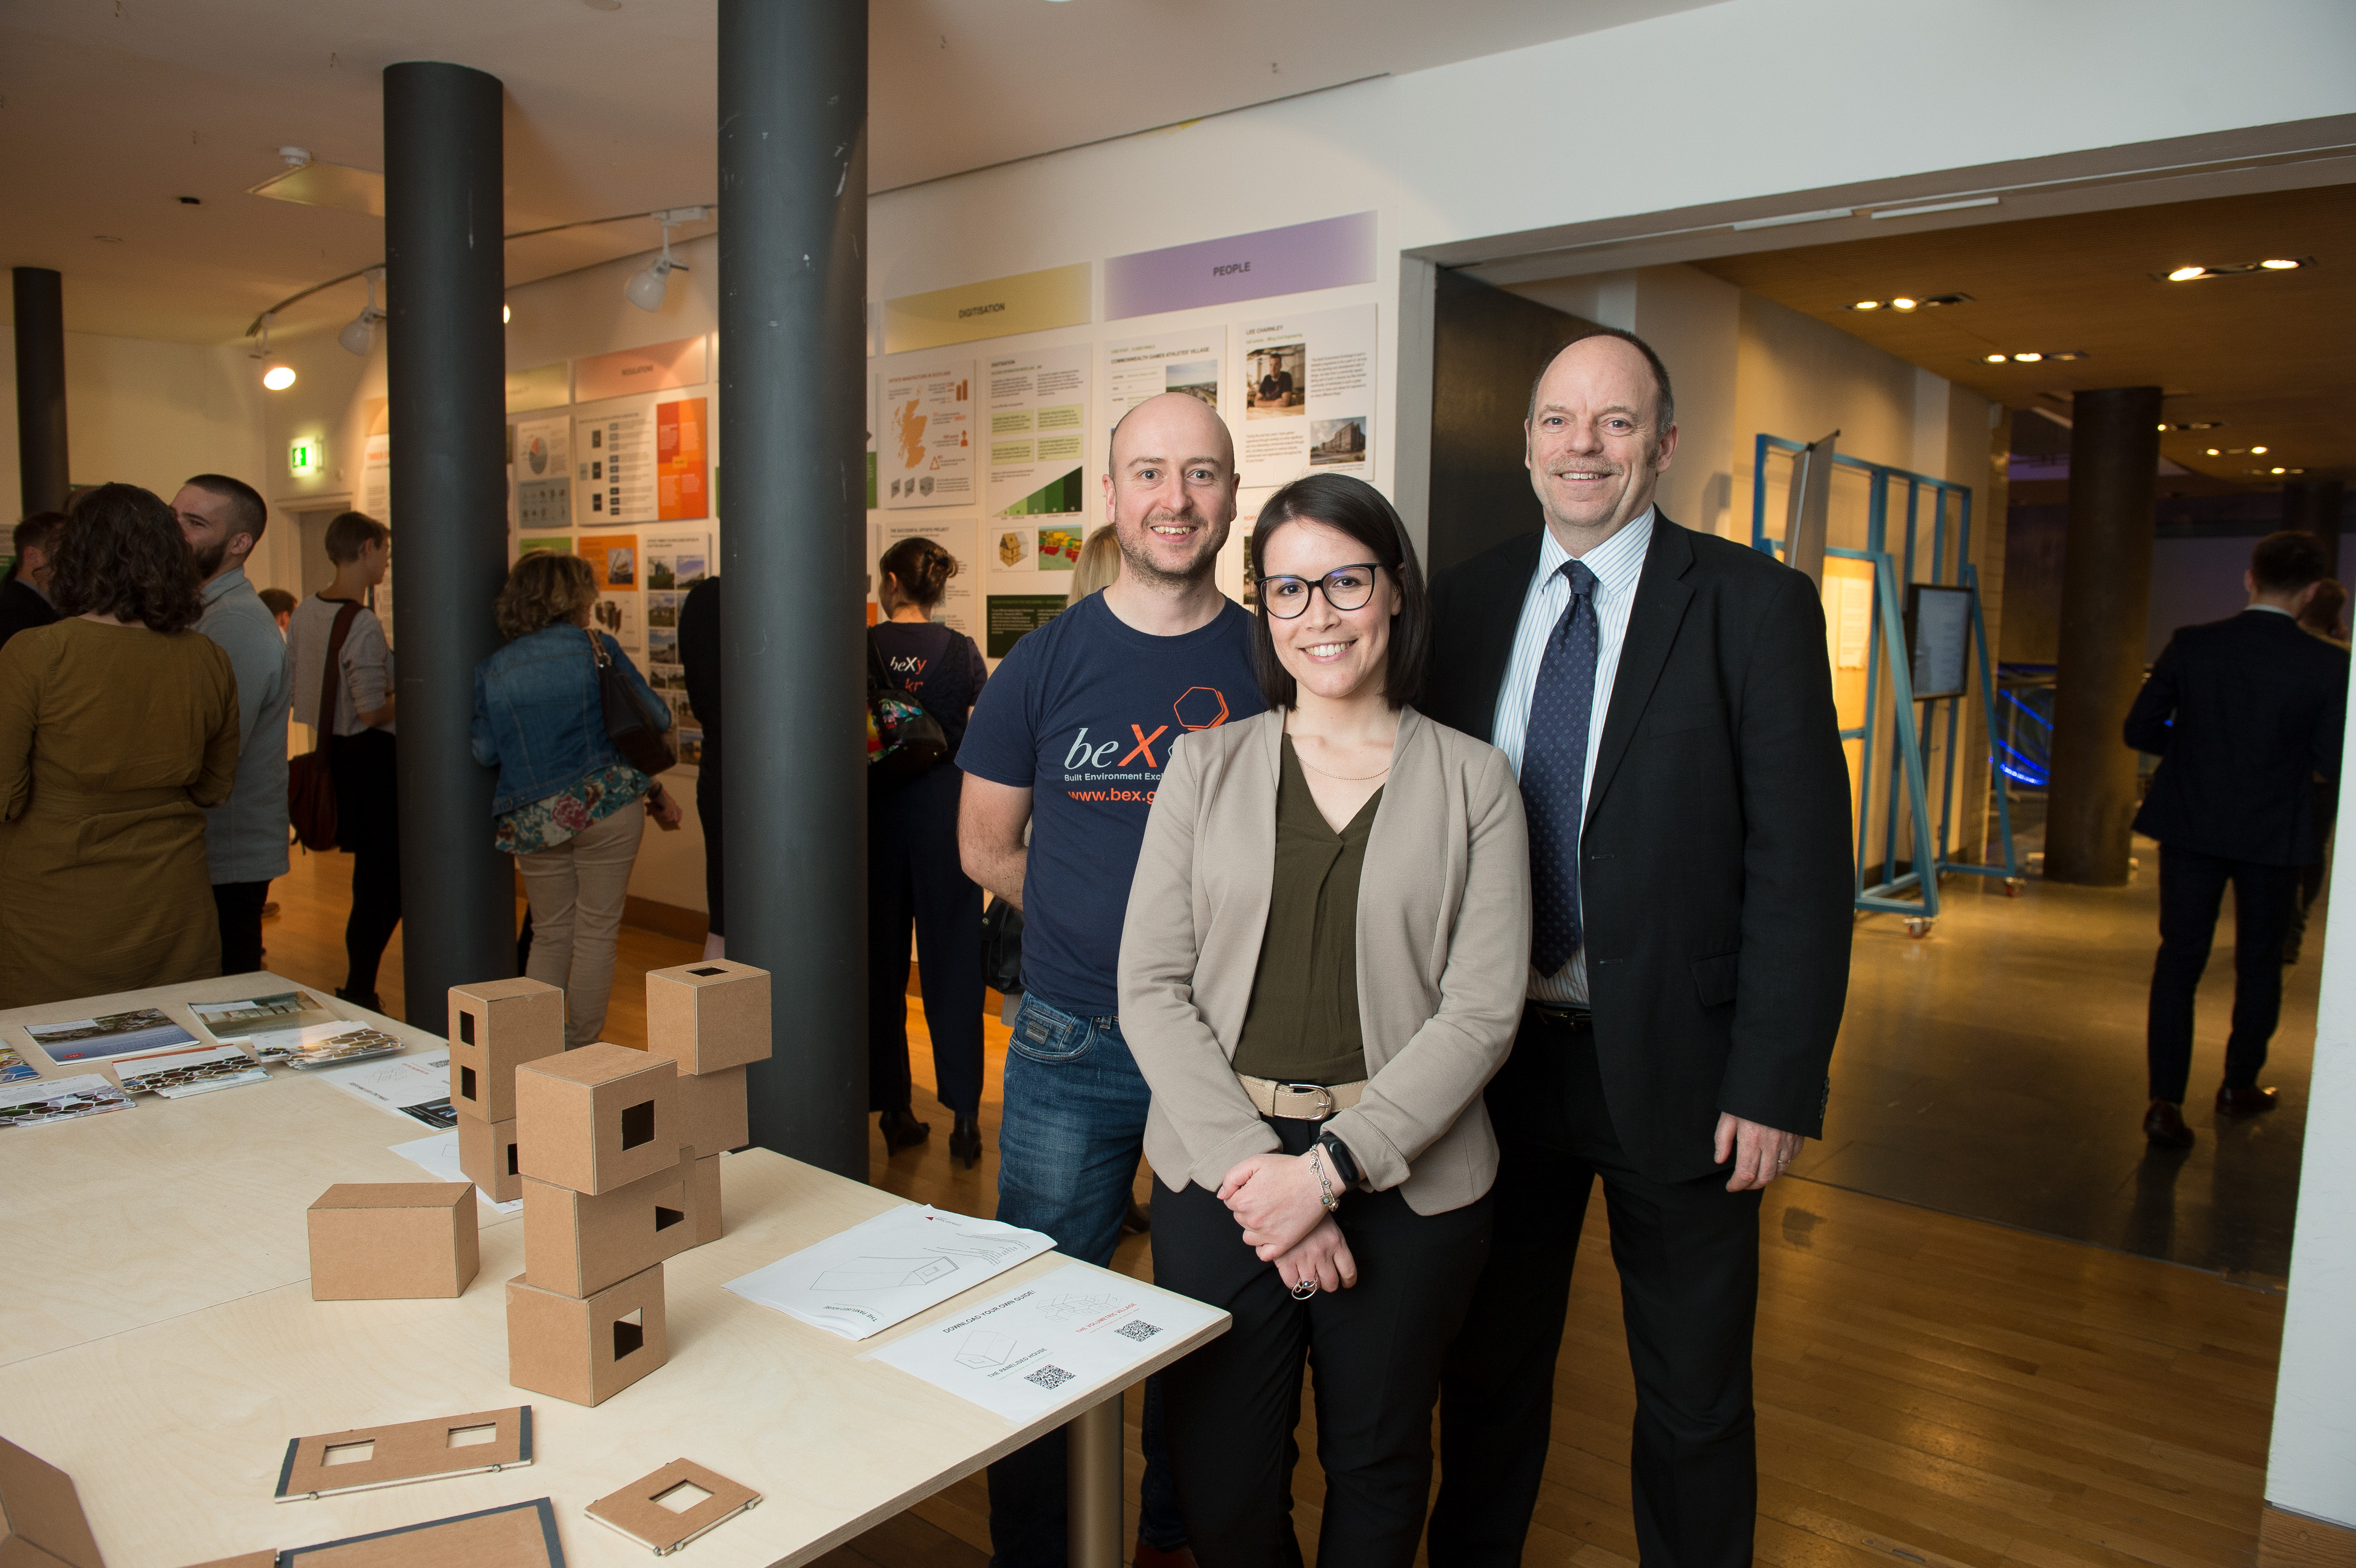 Exhibition showcasing sustainable offsite manufacturing in Scotland opens in Glasgow